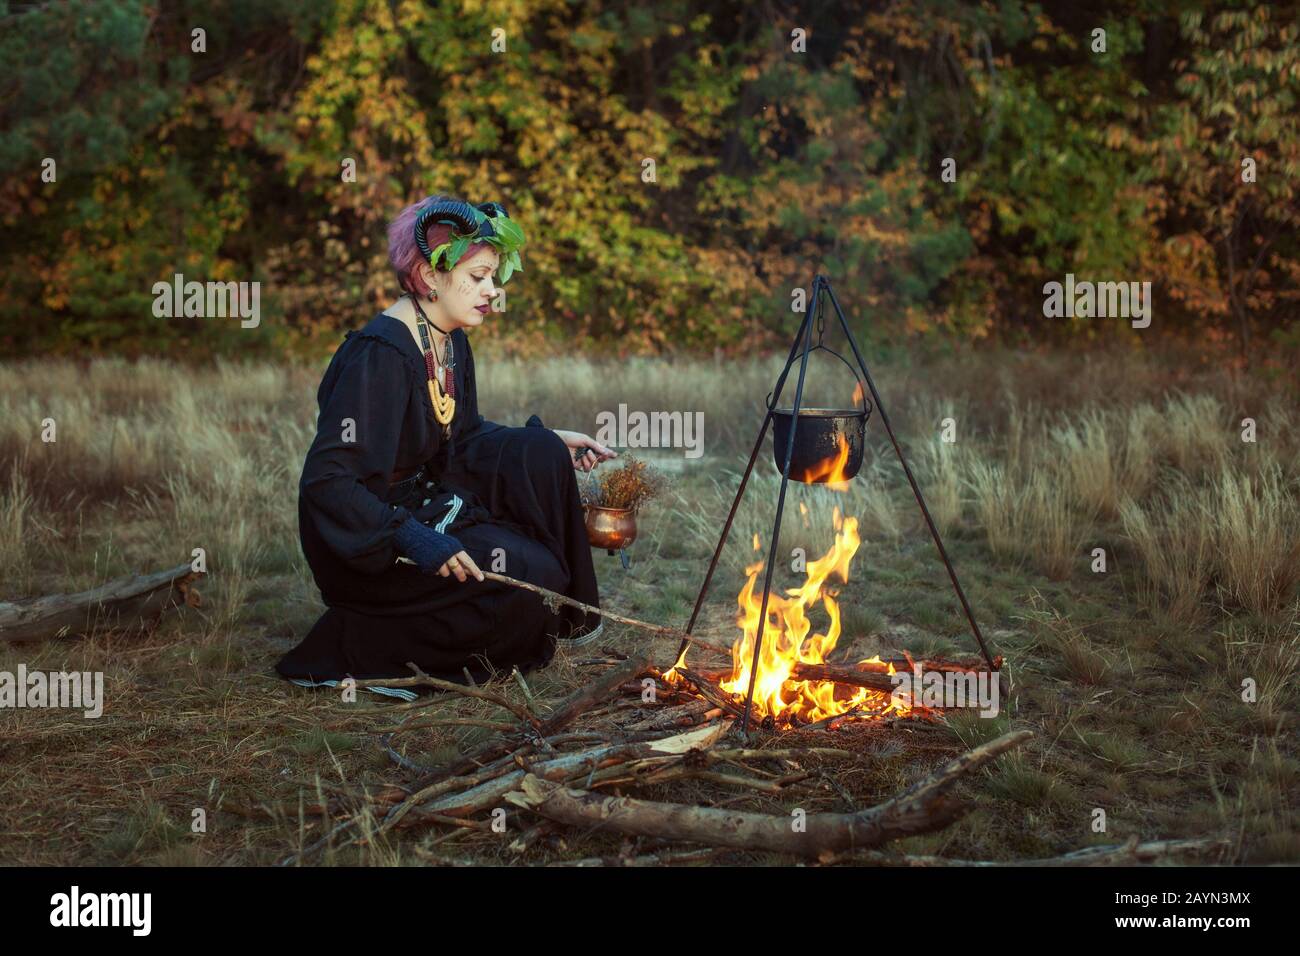 Female shaman prepares a magic potion in a forest on fire. Stock Photo